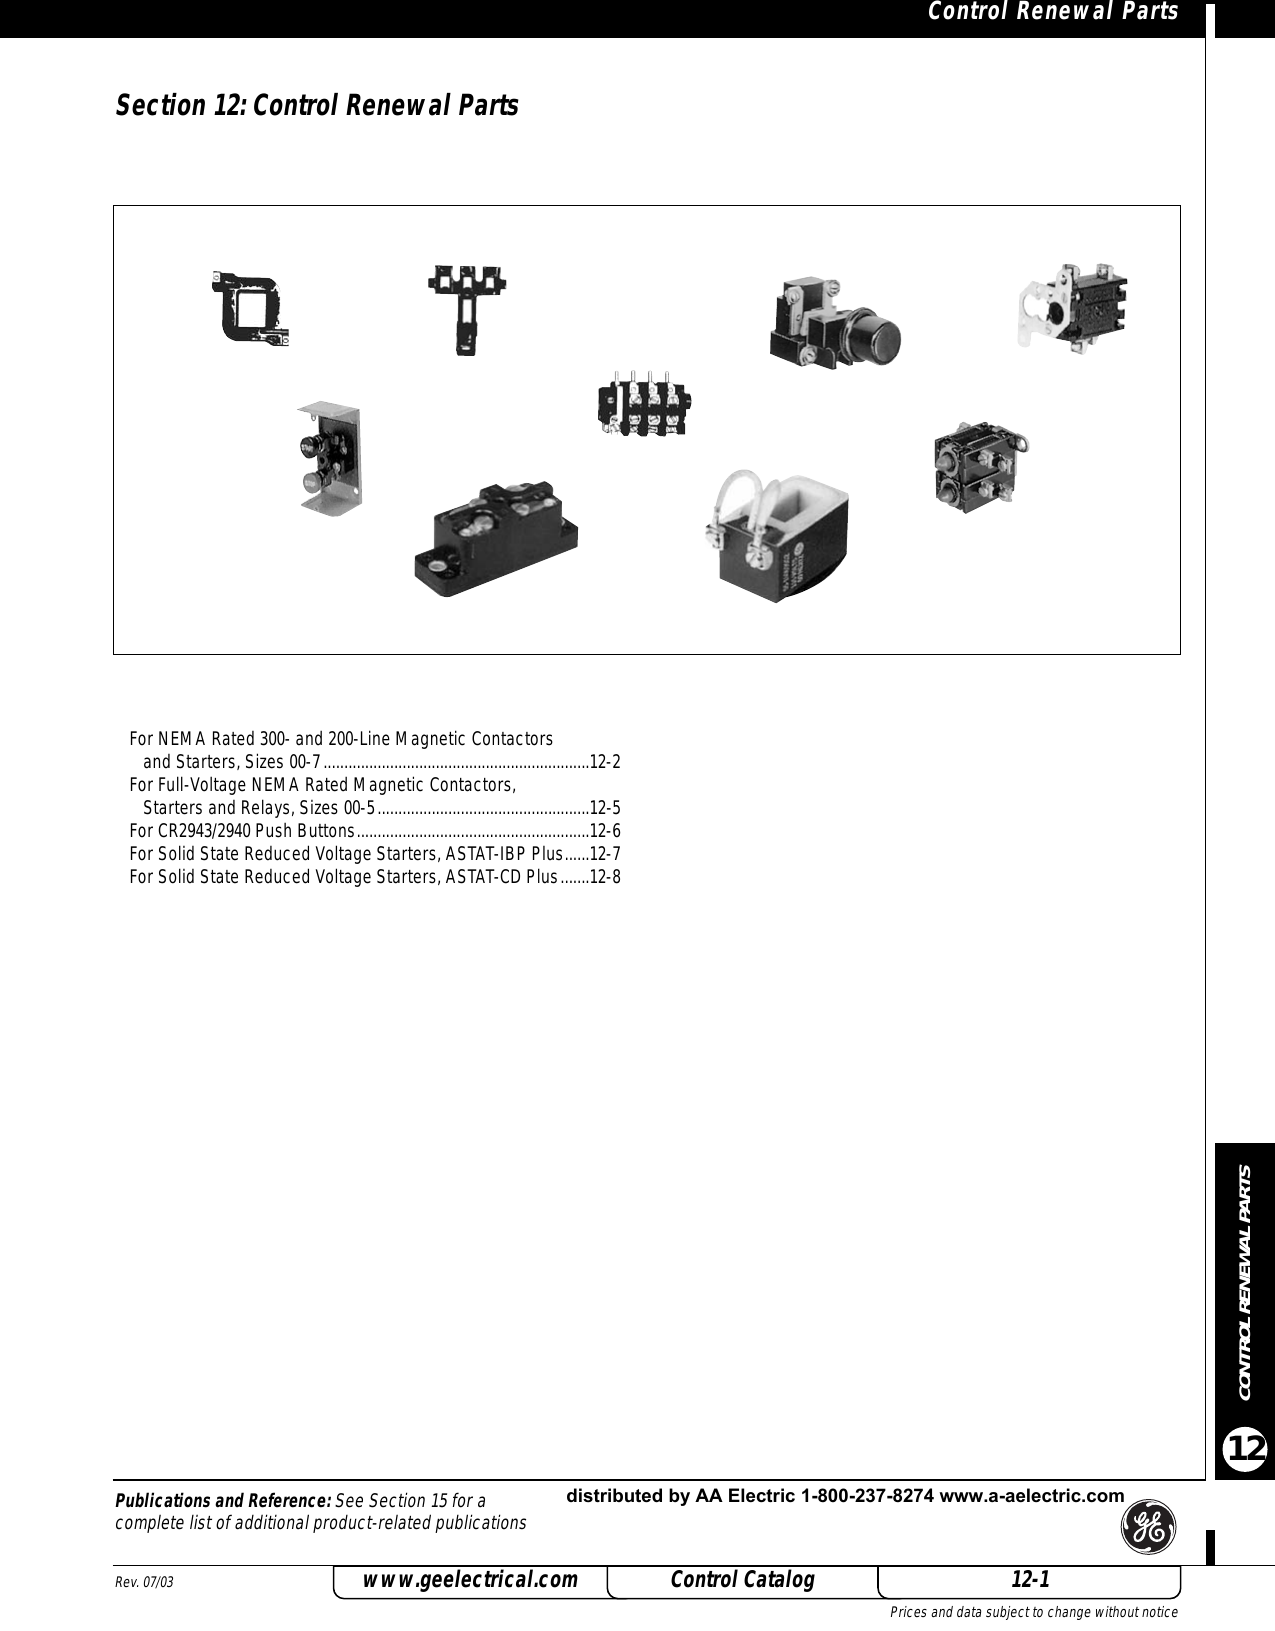 Page 1 of 8 - GE 2005 Control Catalog - Section 12  522426-Catalog